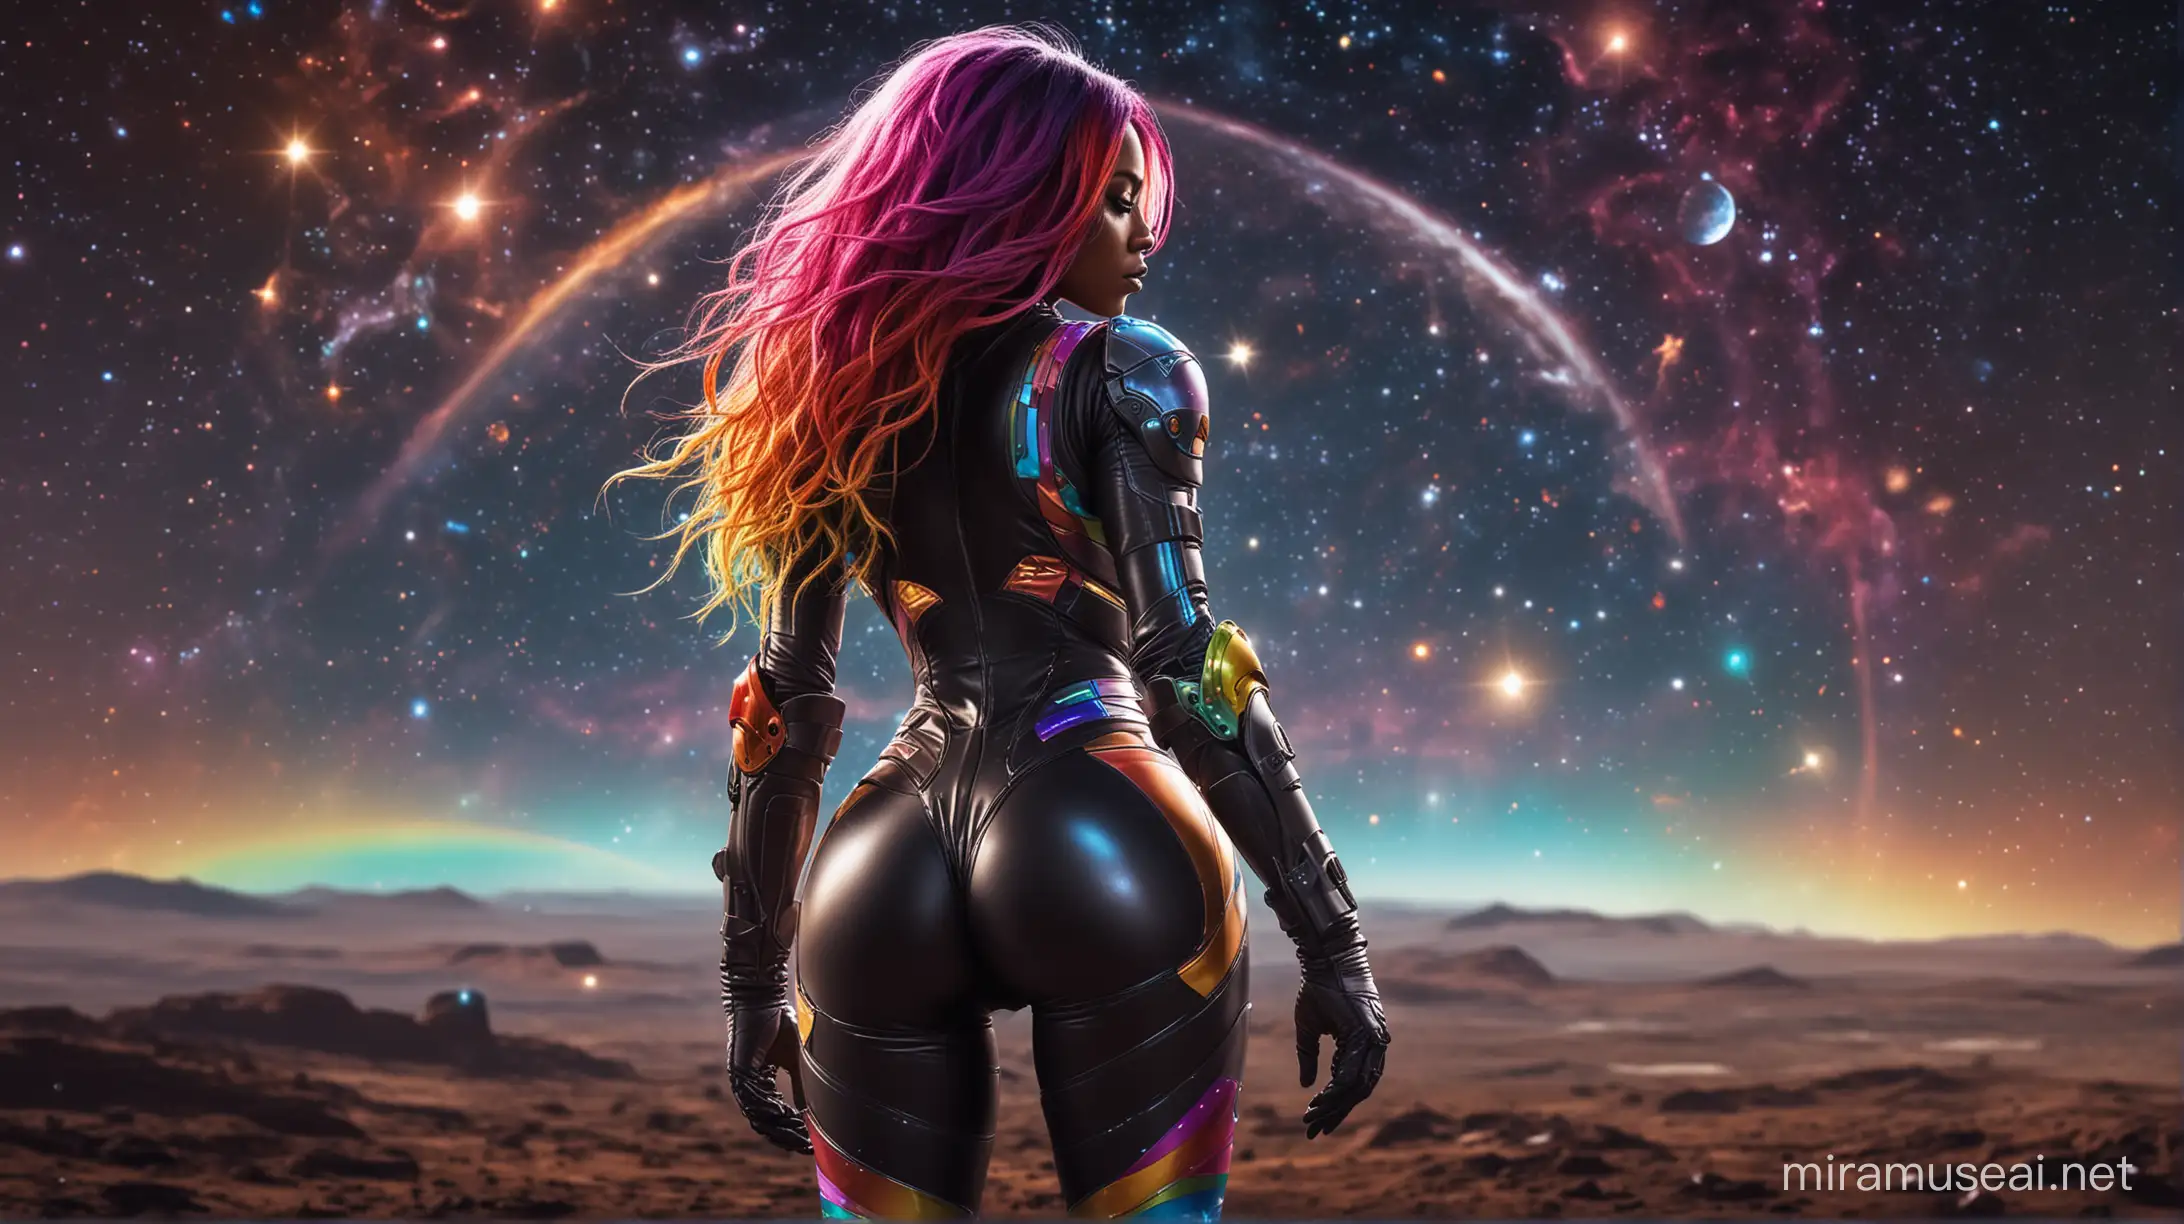 sexy black skin girl, long rainbow hair, wild hair, full body, from behind, round butt, tight spacesuit, armored spacesuit, colorful spacesuit, glowing spacesuit, space, planets, galaxies